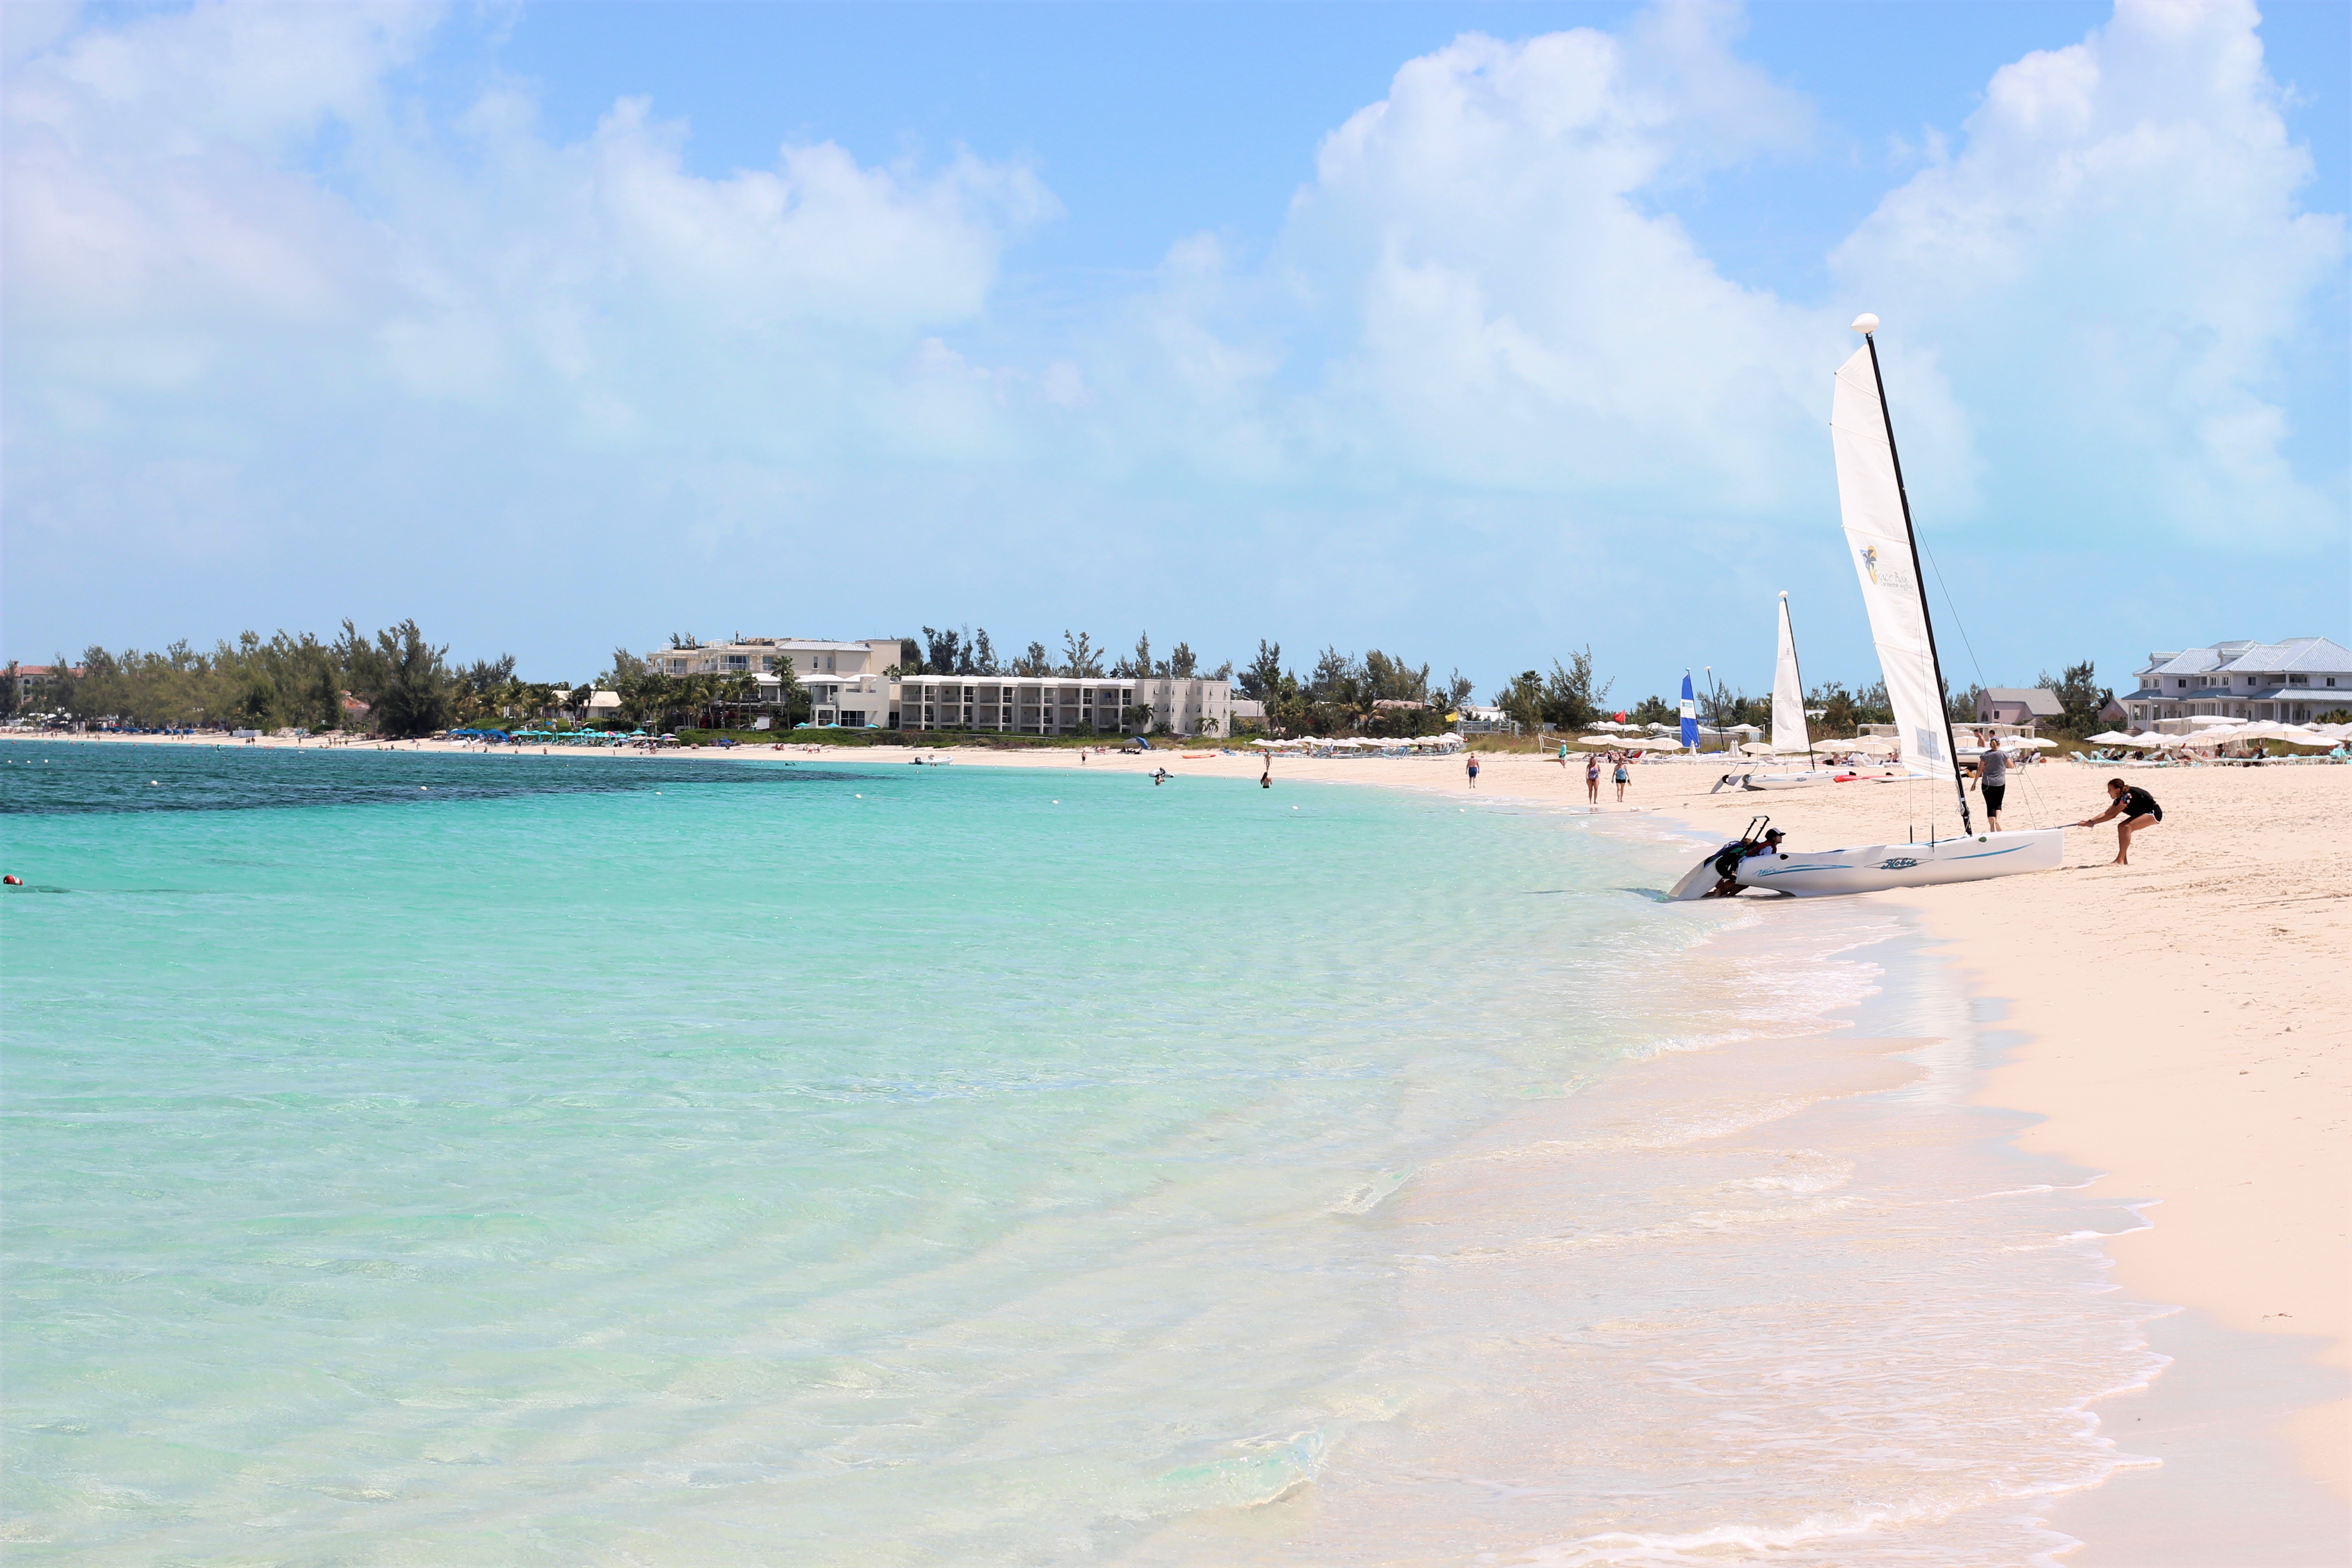 5 unmissable things to do in Turks and Caicos